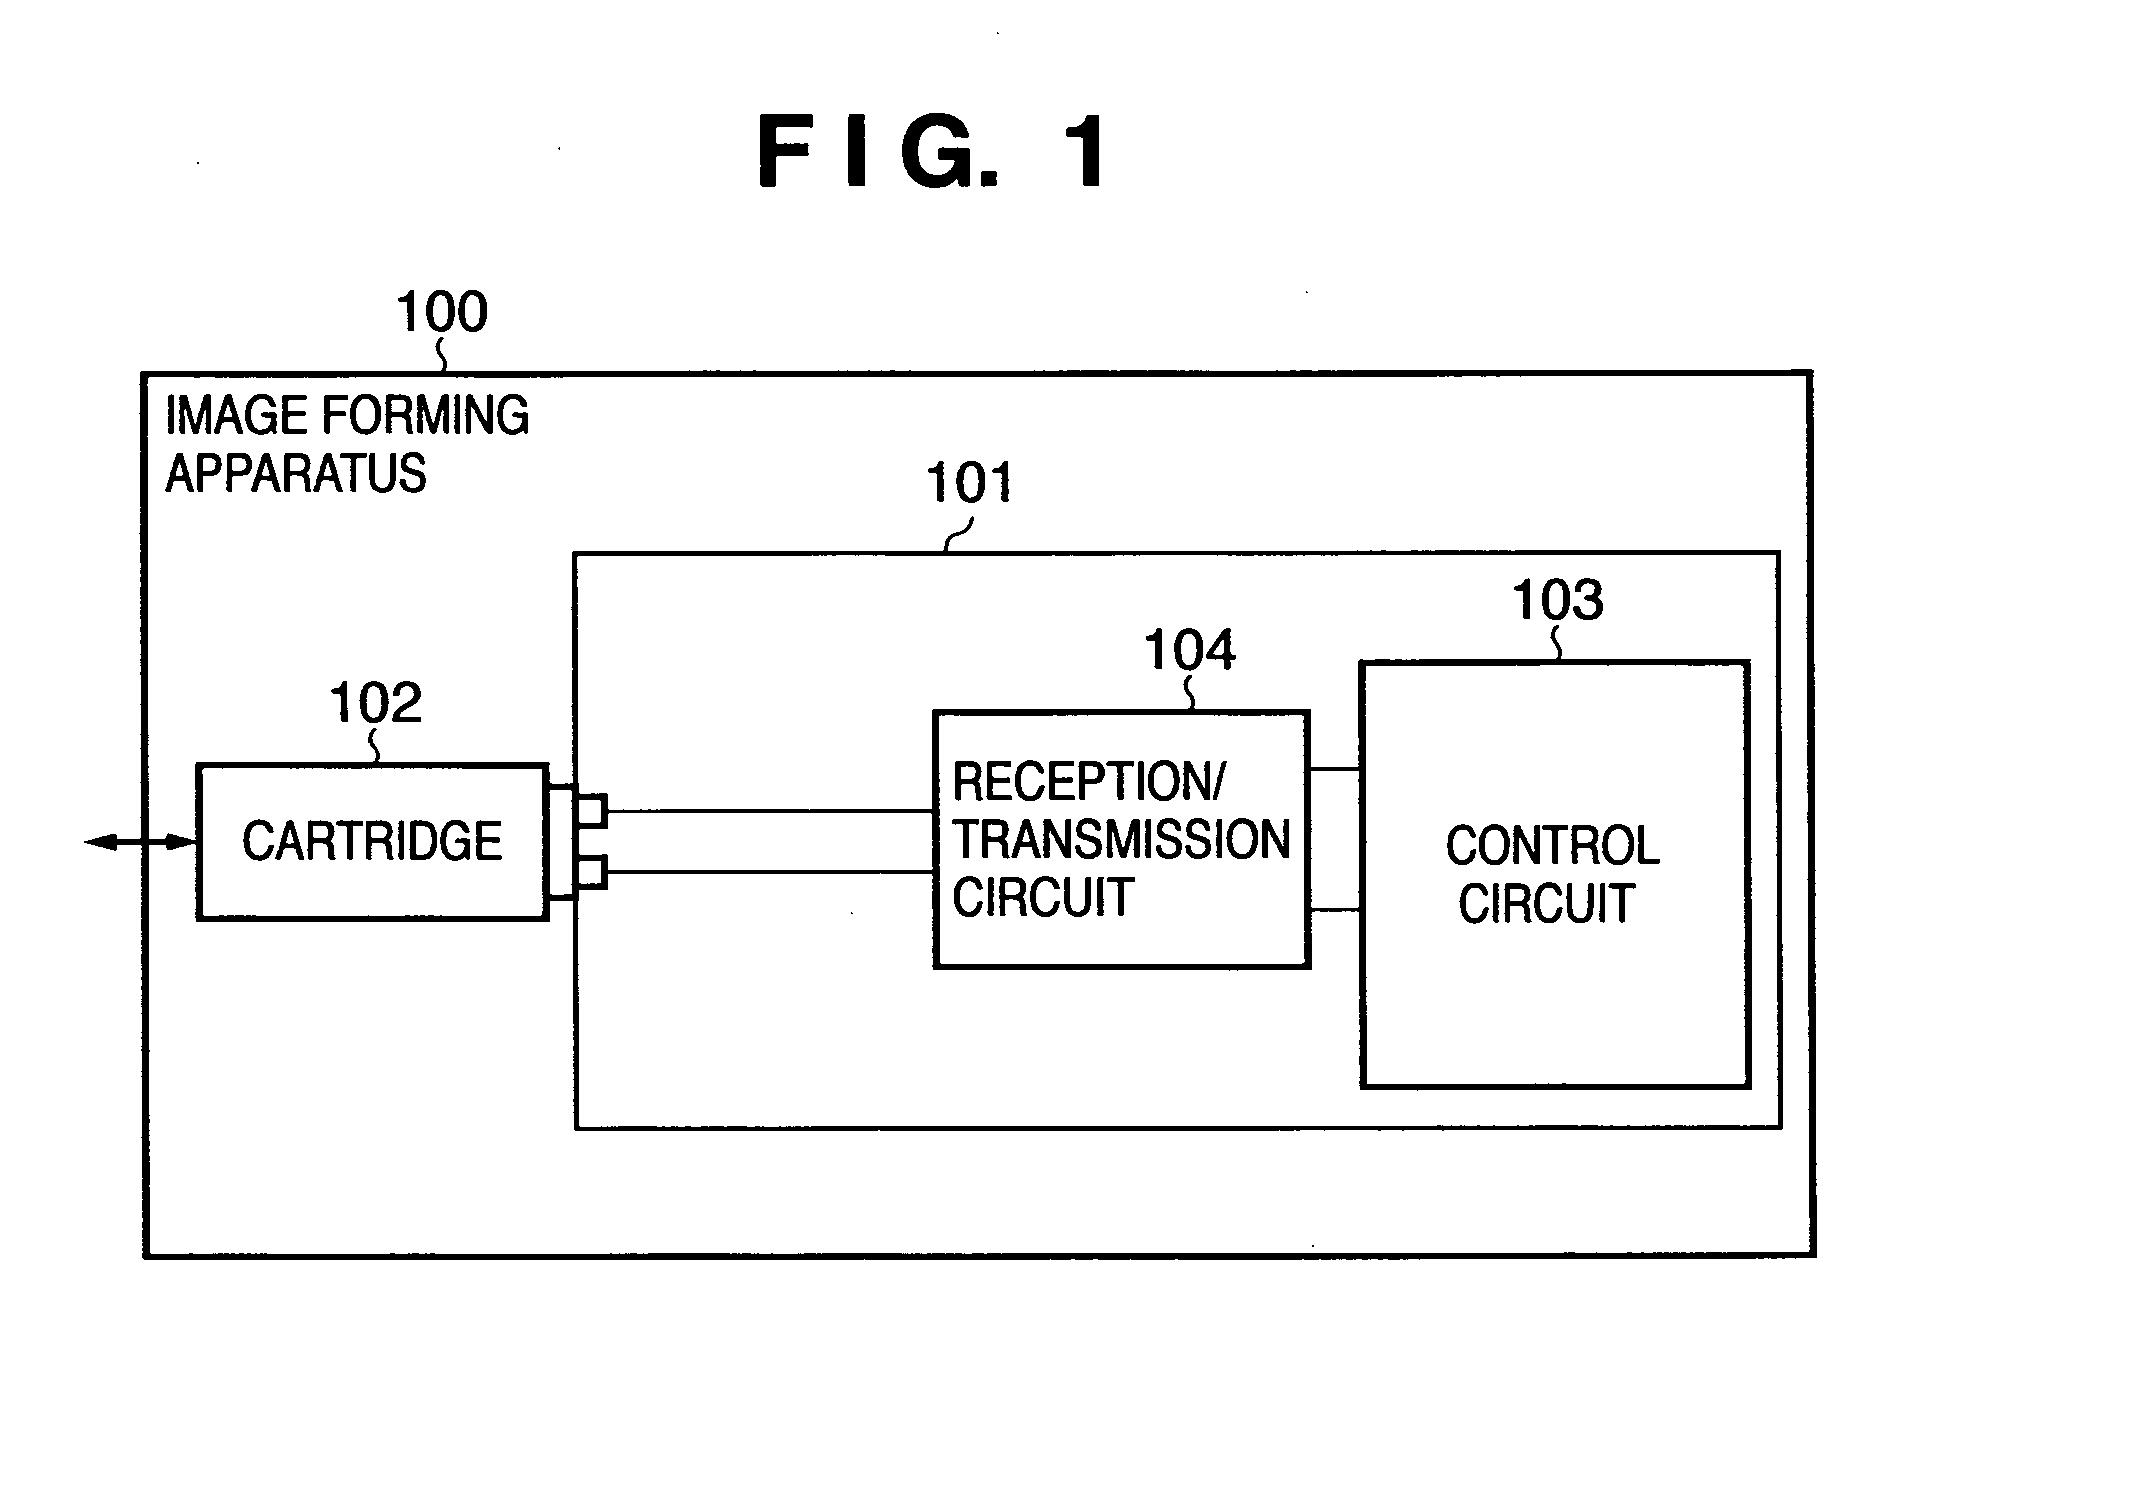 Image forming apparatus, communication device, and cartridge